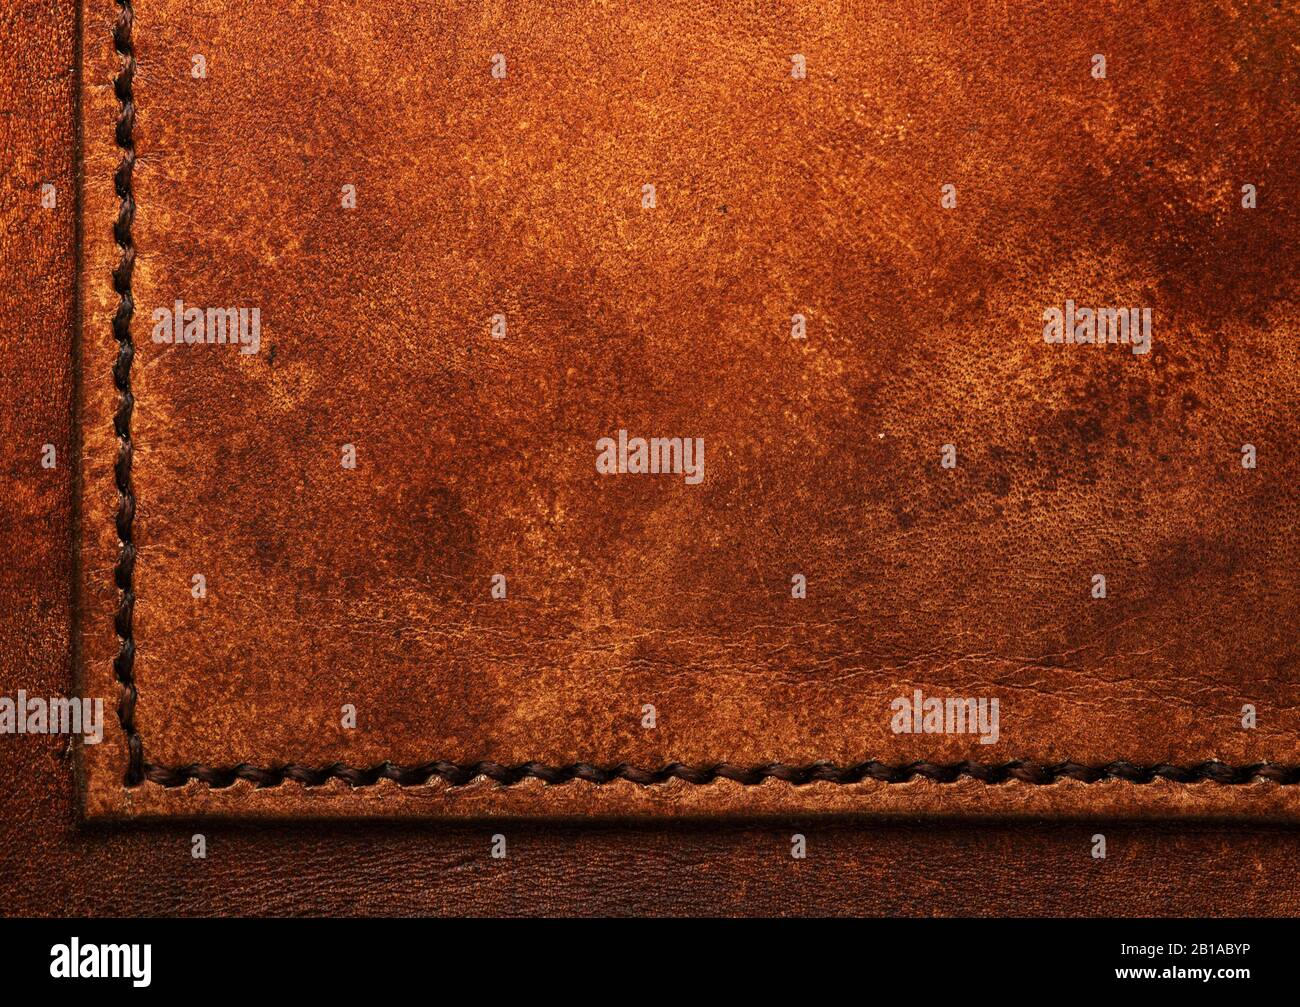 Hand stitched leather showing dark brown waxed thread closeup full frame macro on vegetable tanned top grain Stock Photo